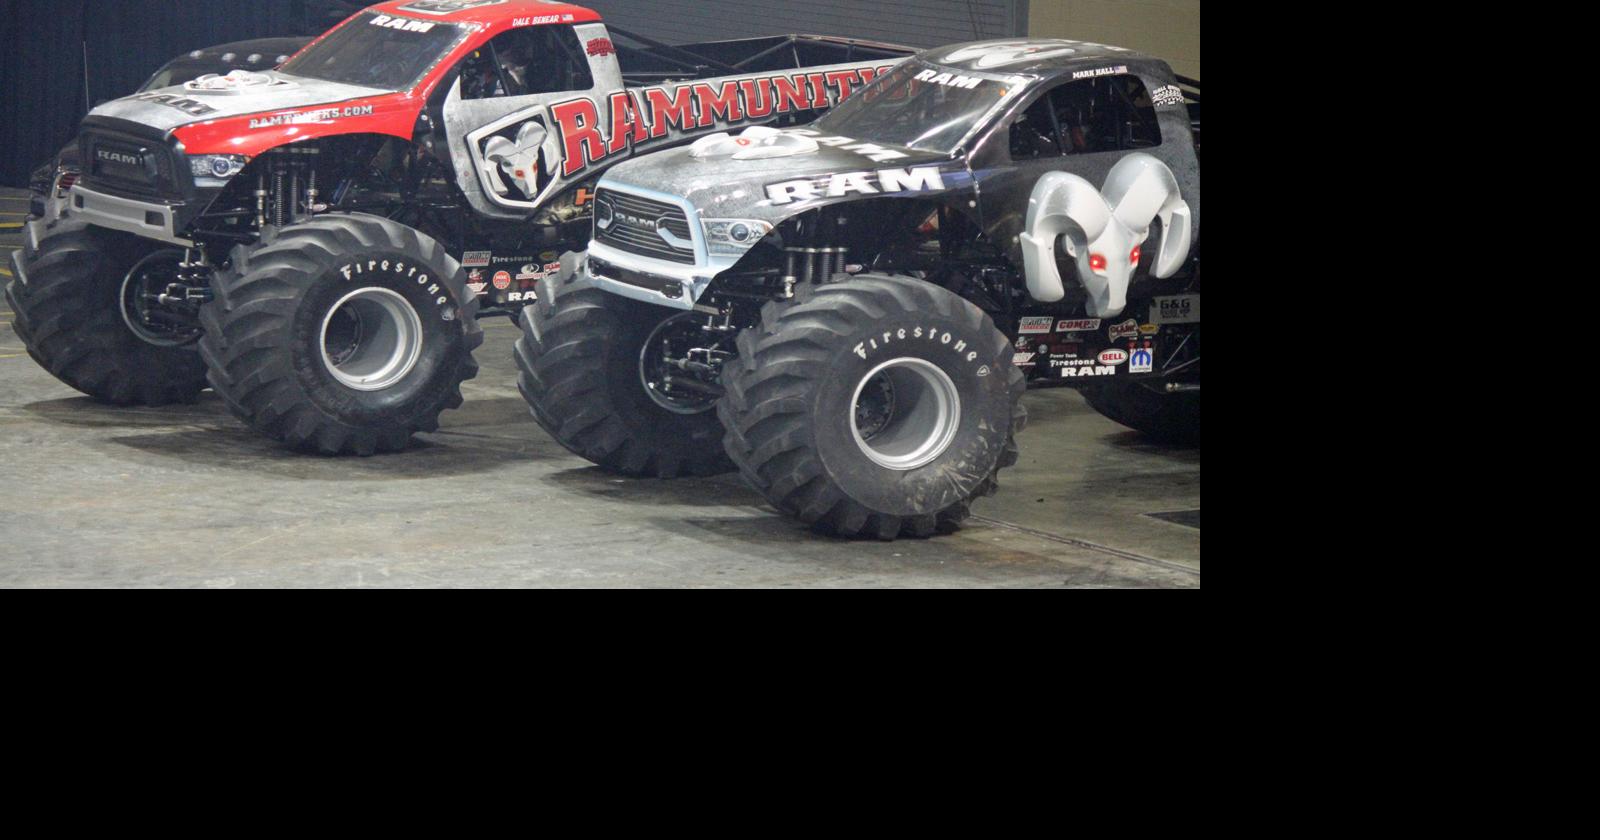 Do you hear that? The Monster Jam trucks are coming and they're ready to  roar!